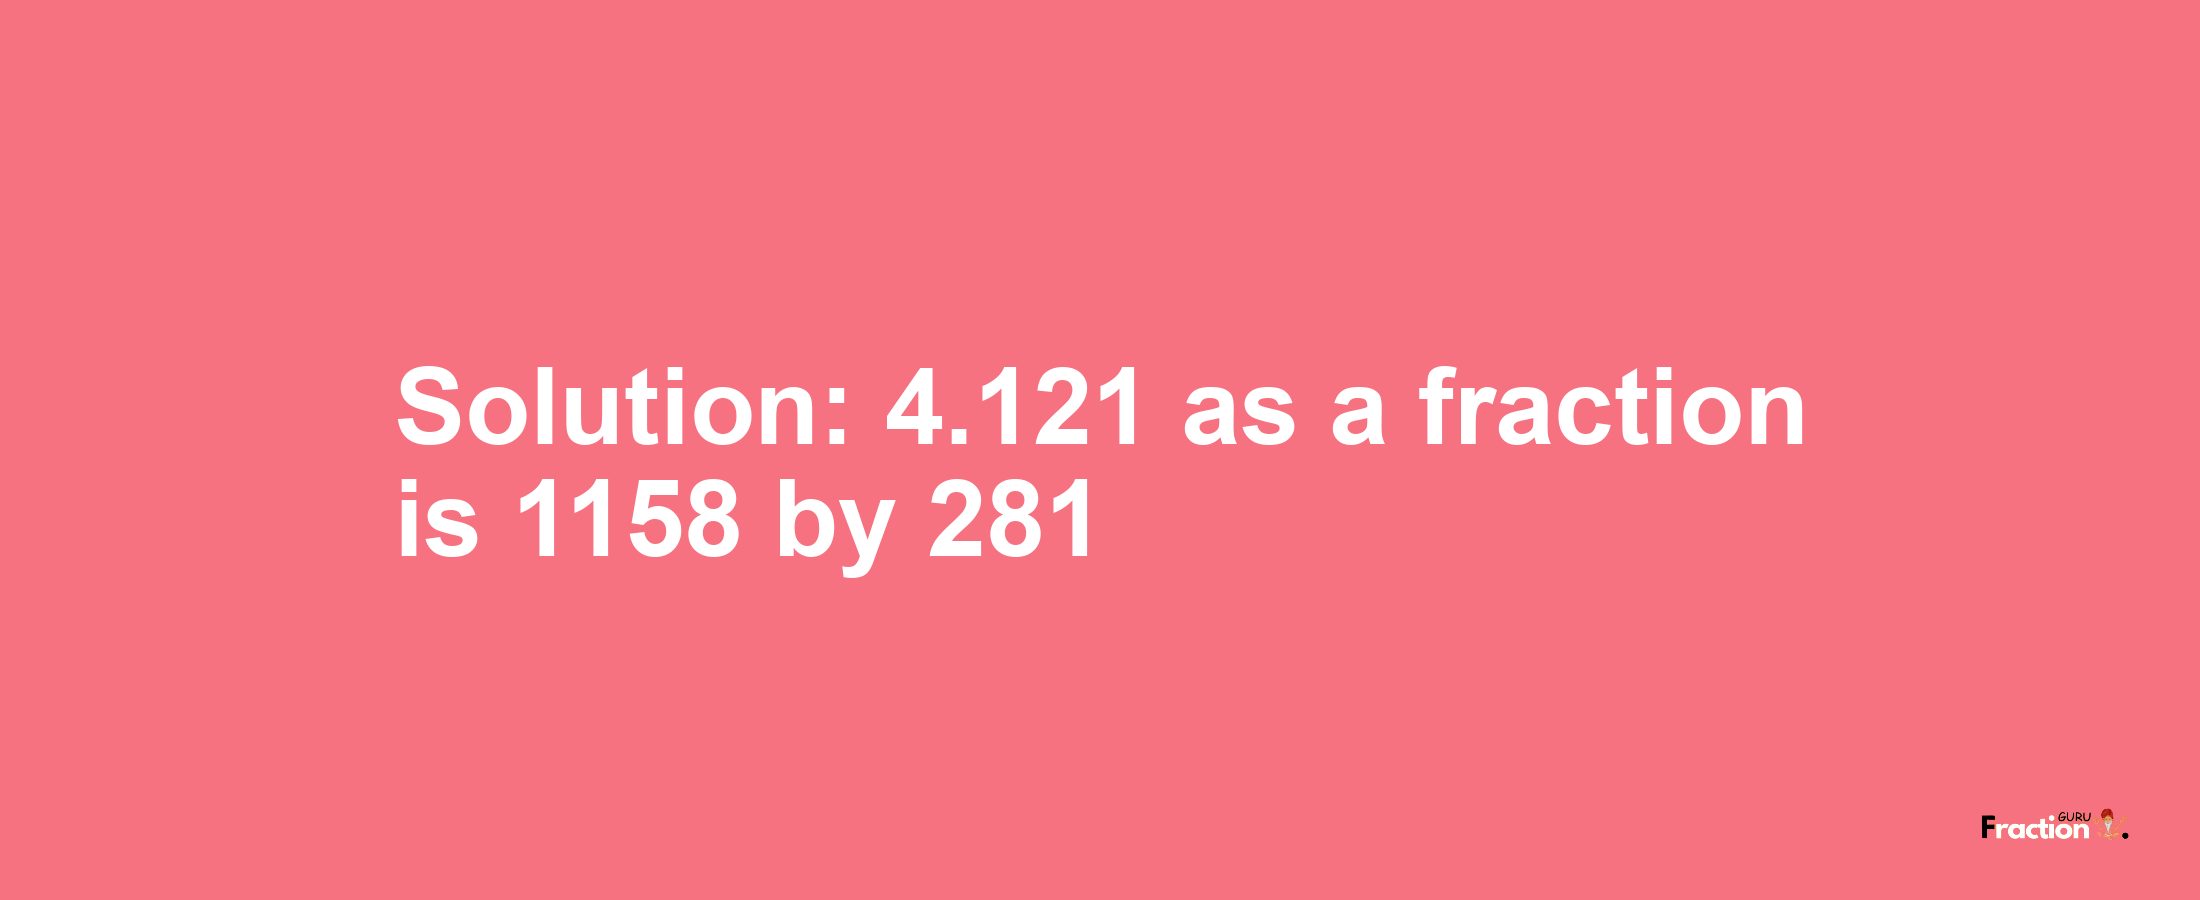 Solution:4.121 as a fraction is 1158/281